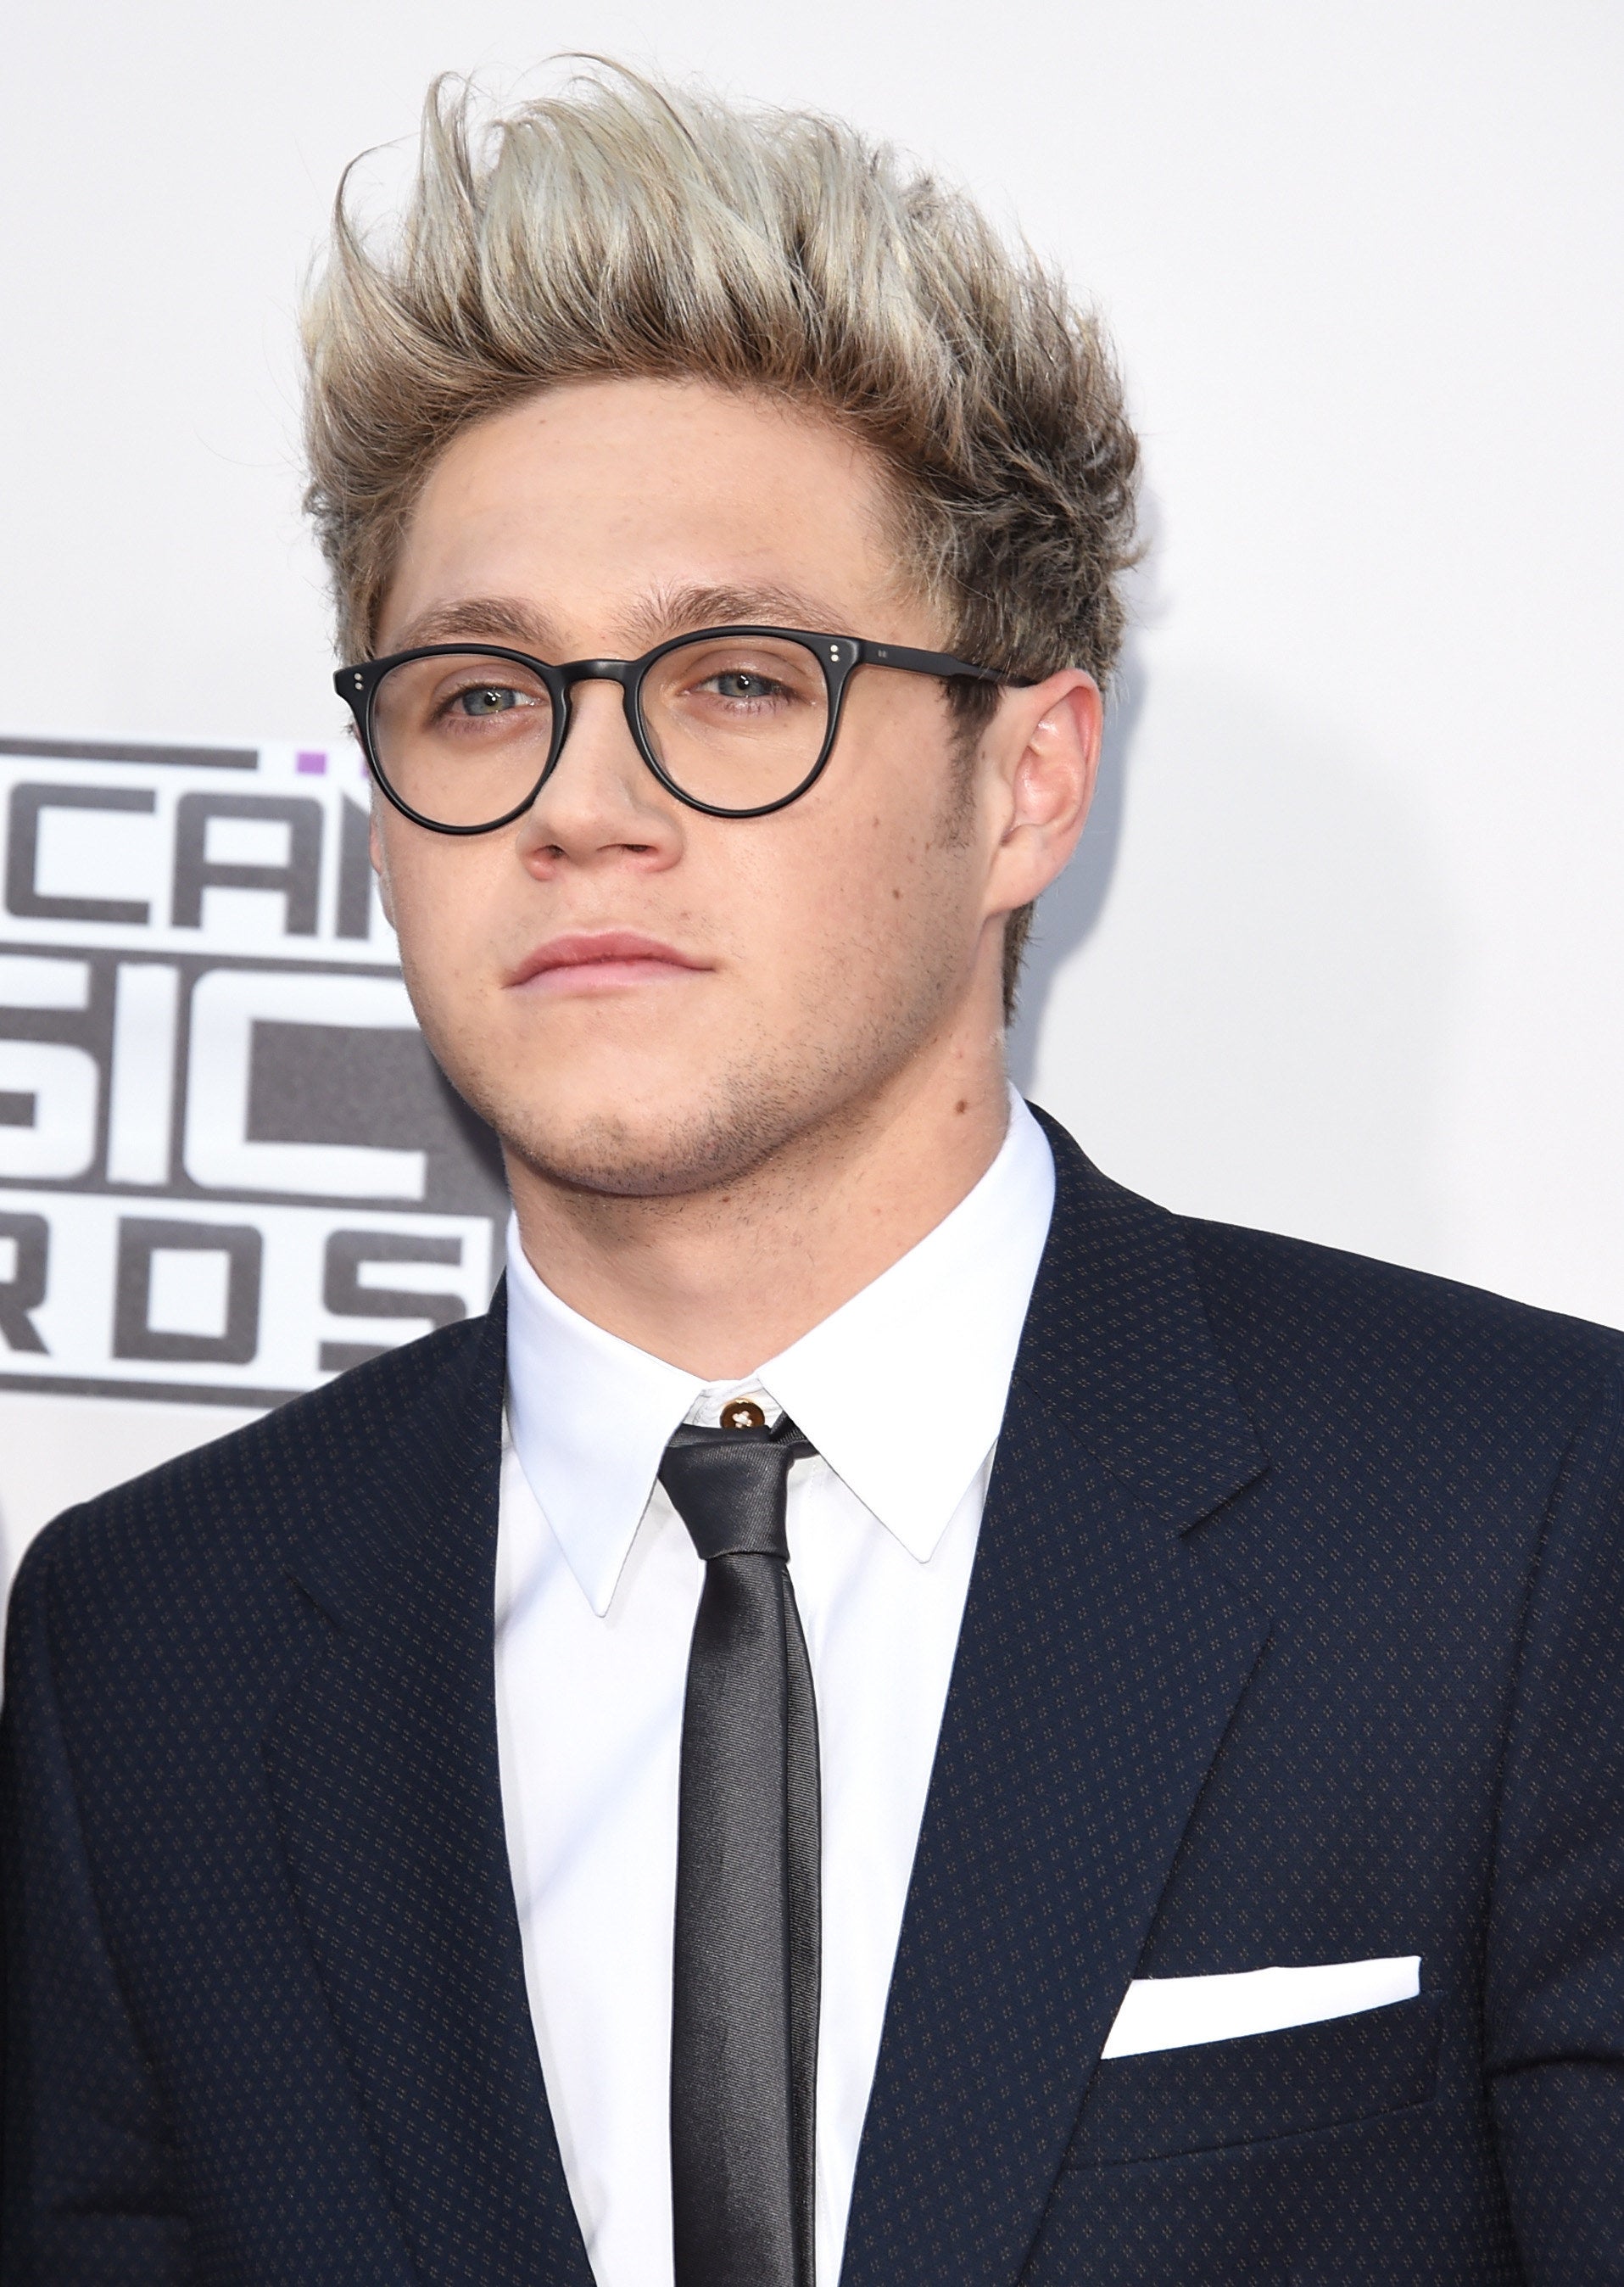 Niall Horan at the American Music Awards in 2015